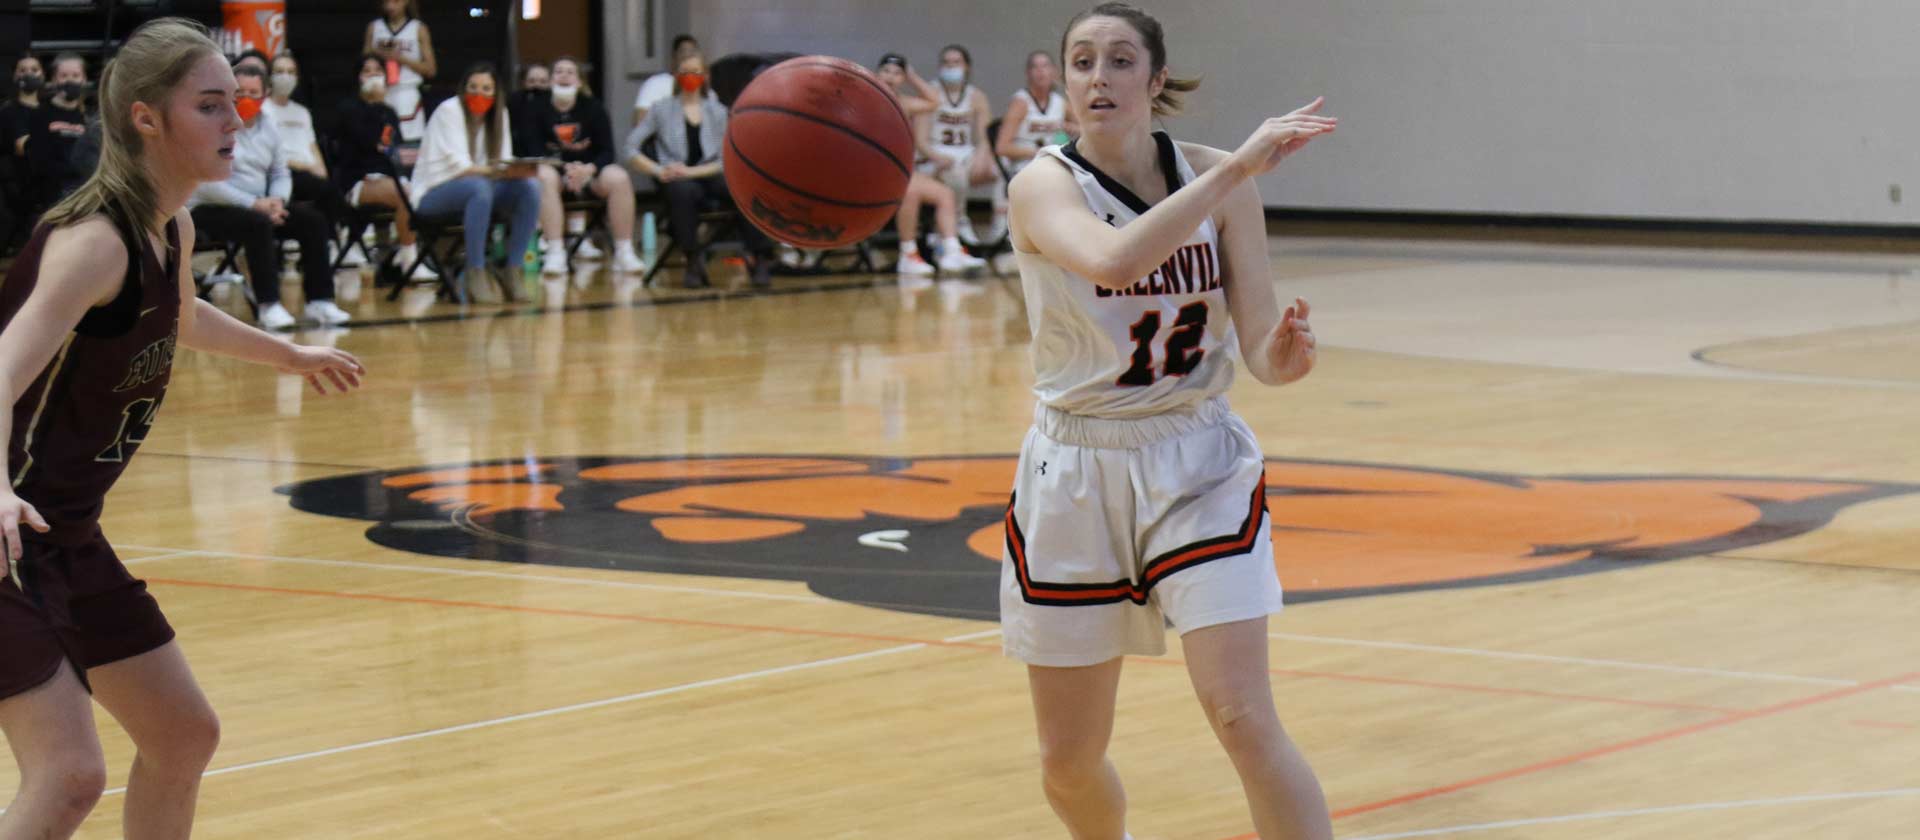 Women's basketball drops contest at Millikin